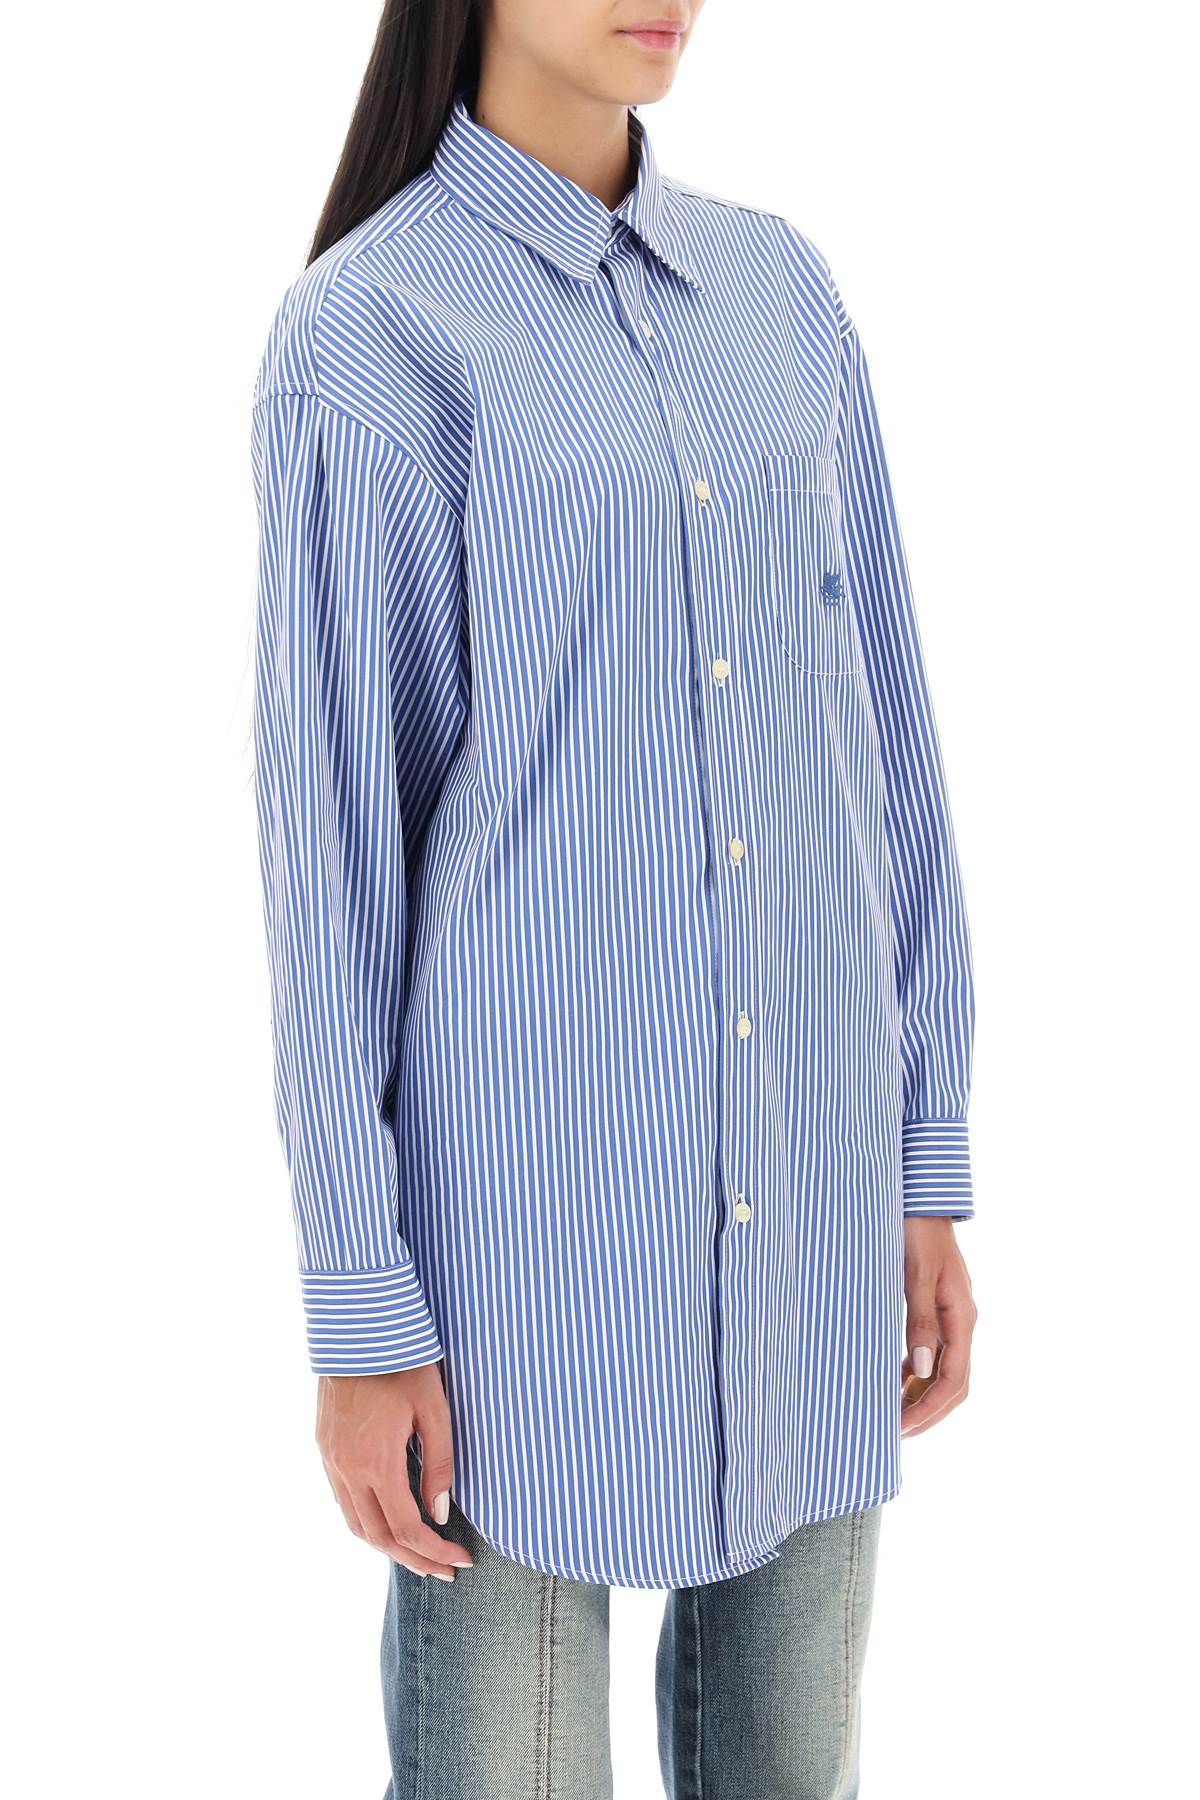 ETRO Women's Striped Poplin Shirt in Mixed Colours for FW23